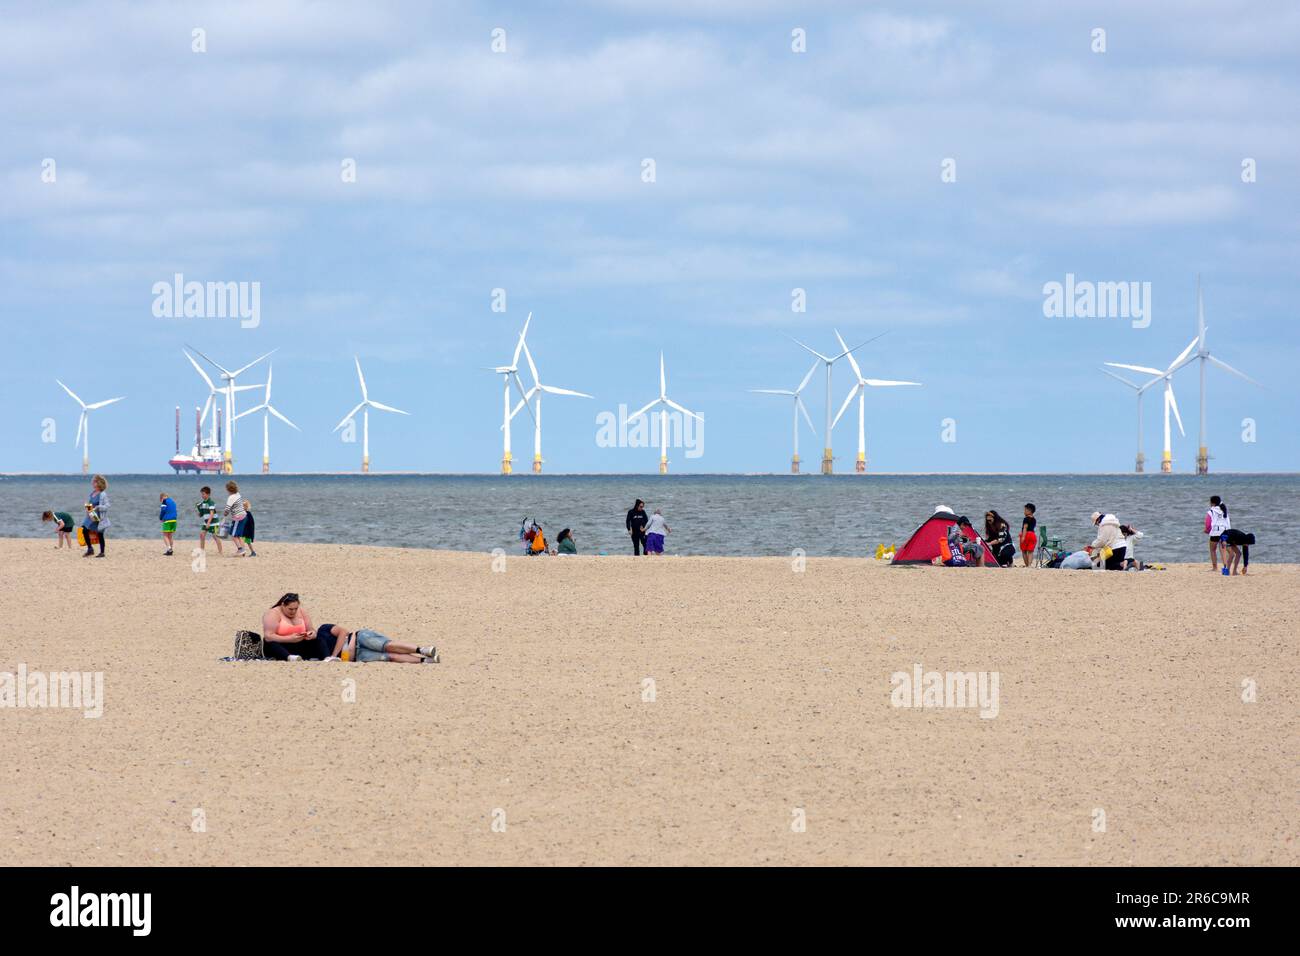 Great Yarmouth Beach showing offshore wind turbines, Great Yarmouth, Norfolk, England, United Kingdom Stock Photo